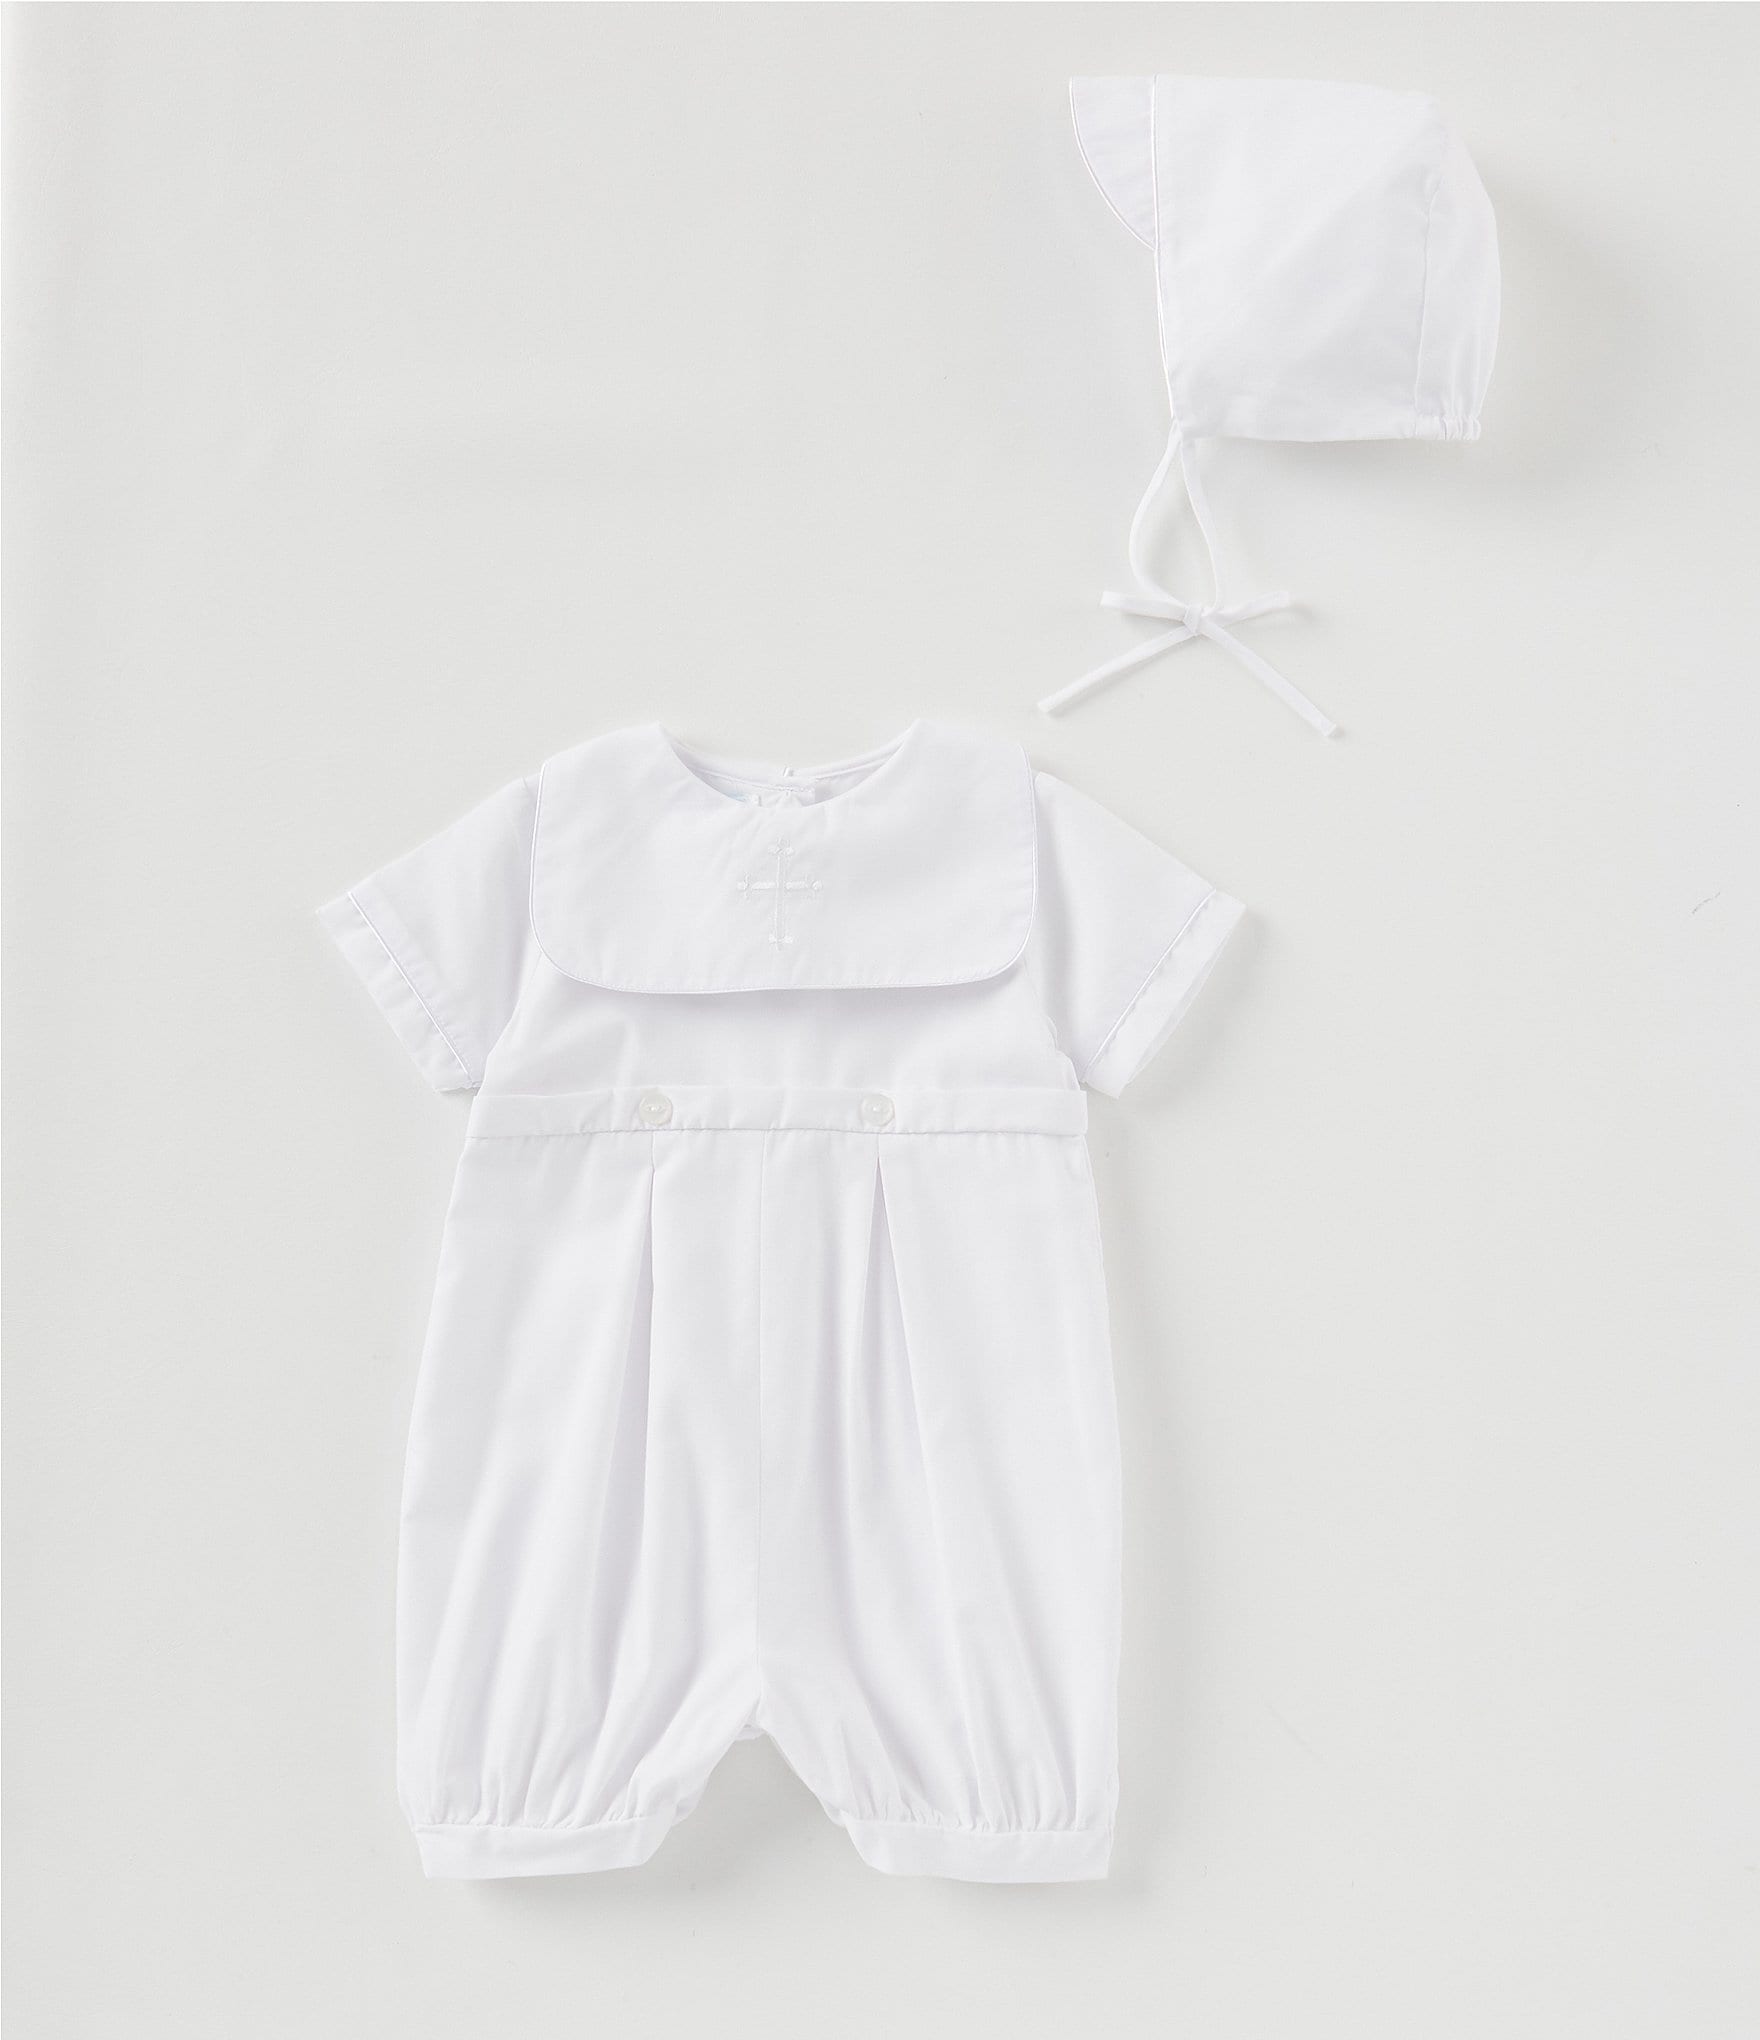 boy christening outfit 18 months